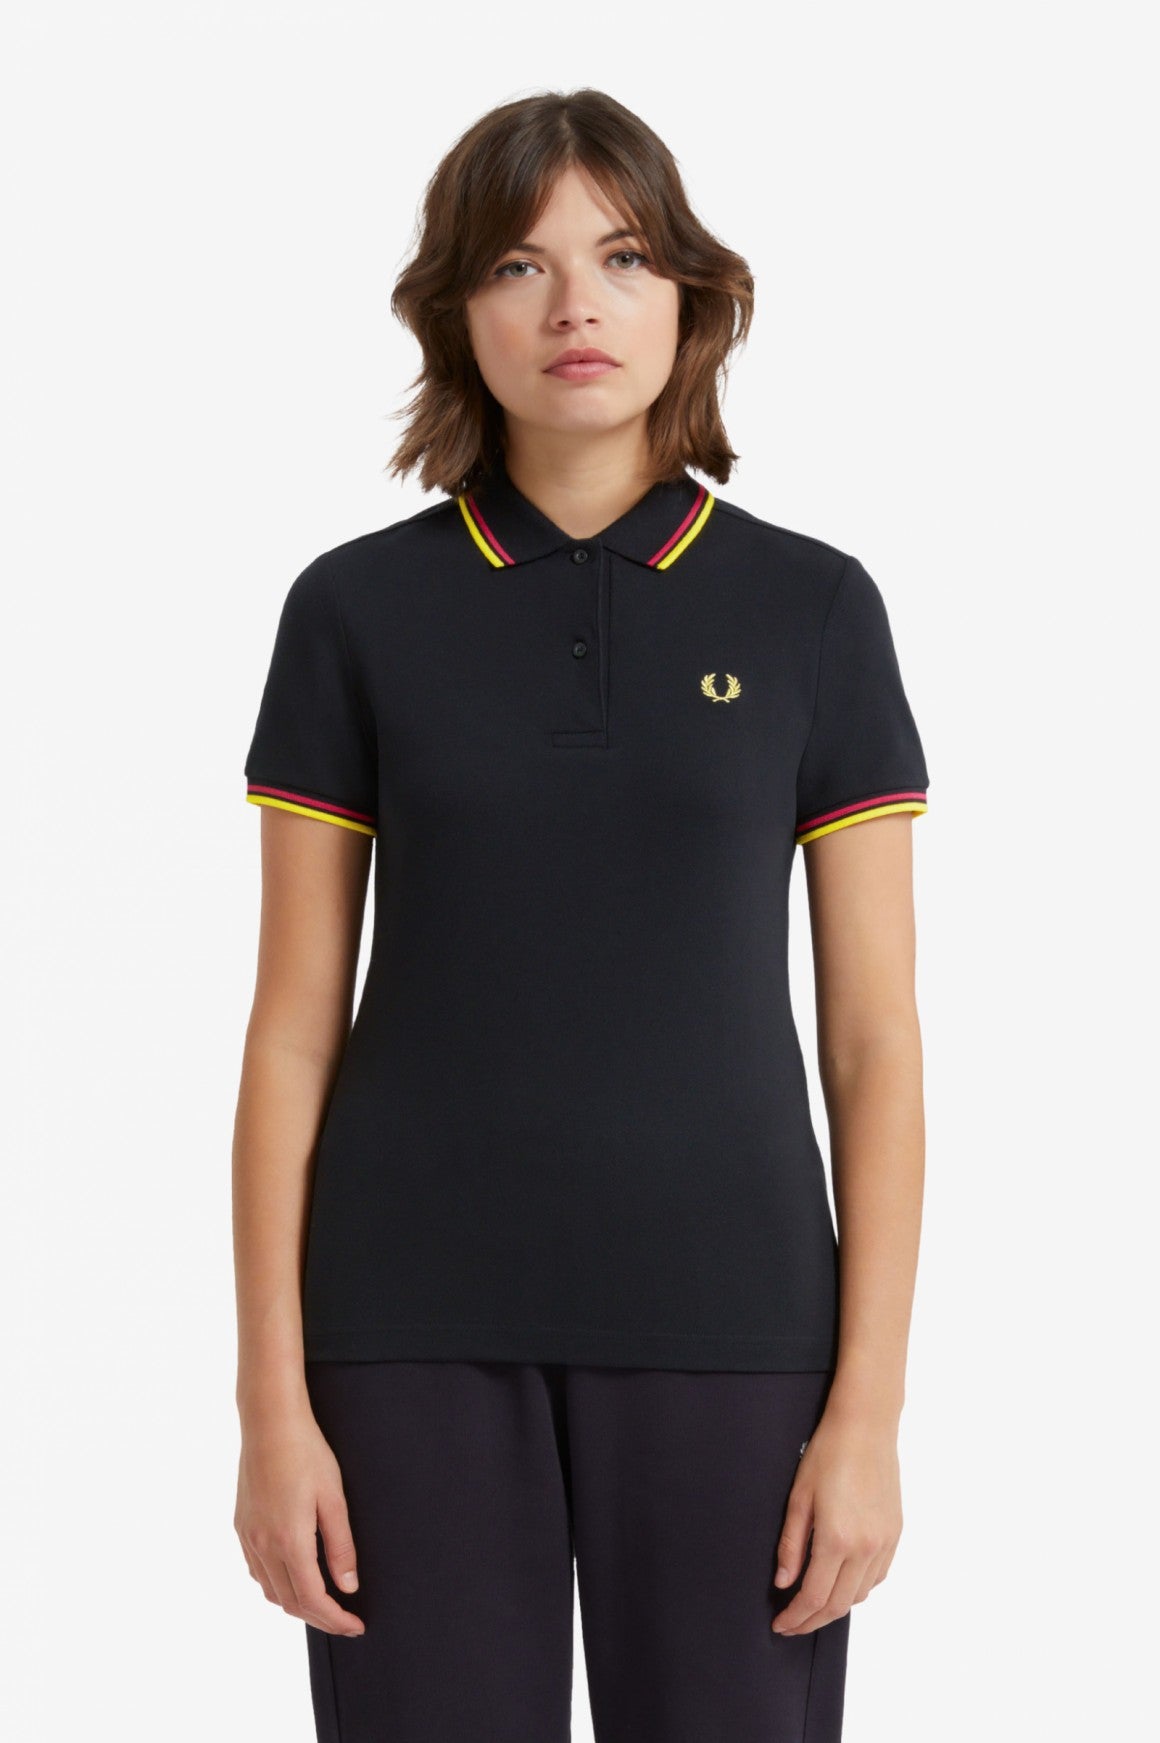 LADIES TWIN TIPPED FRED PERRY SHIRT (BLACK/LOVE POTION/GOLDEN KIWI